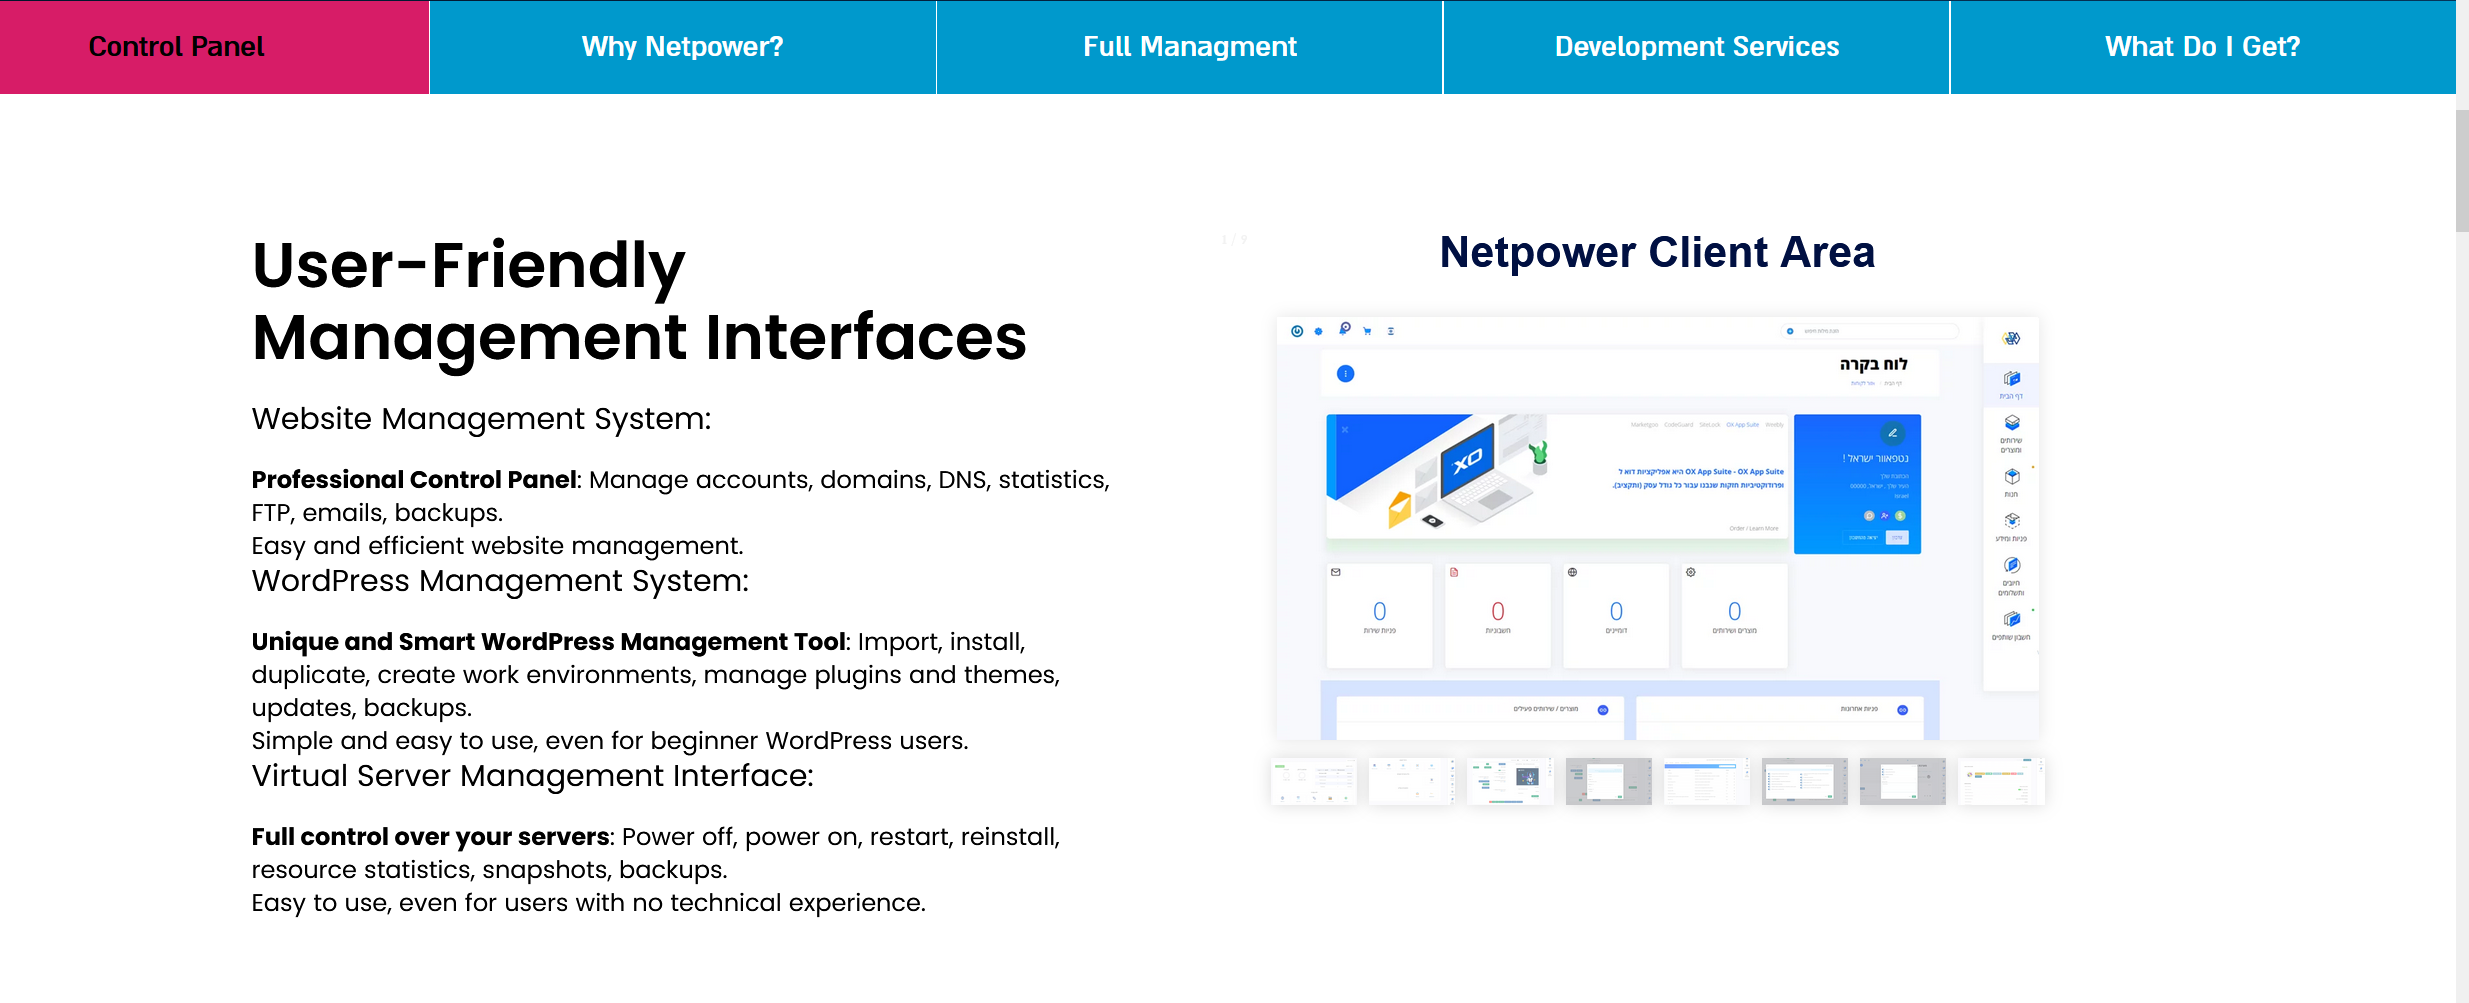 Netpower Launches WordPress-Optimized VPS for Superior Performance and Security